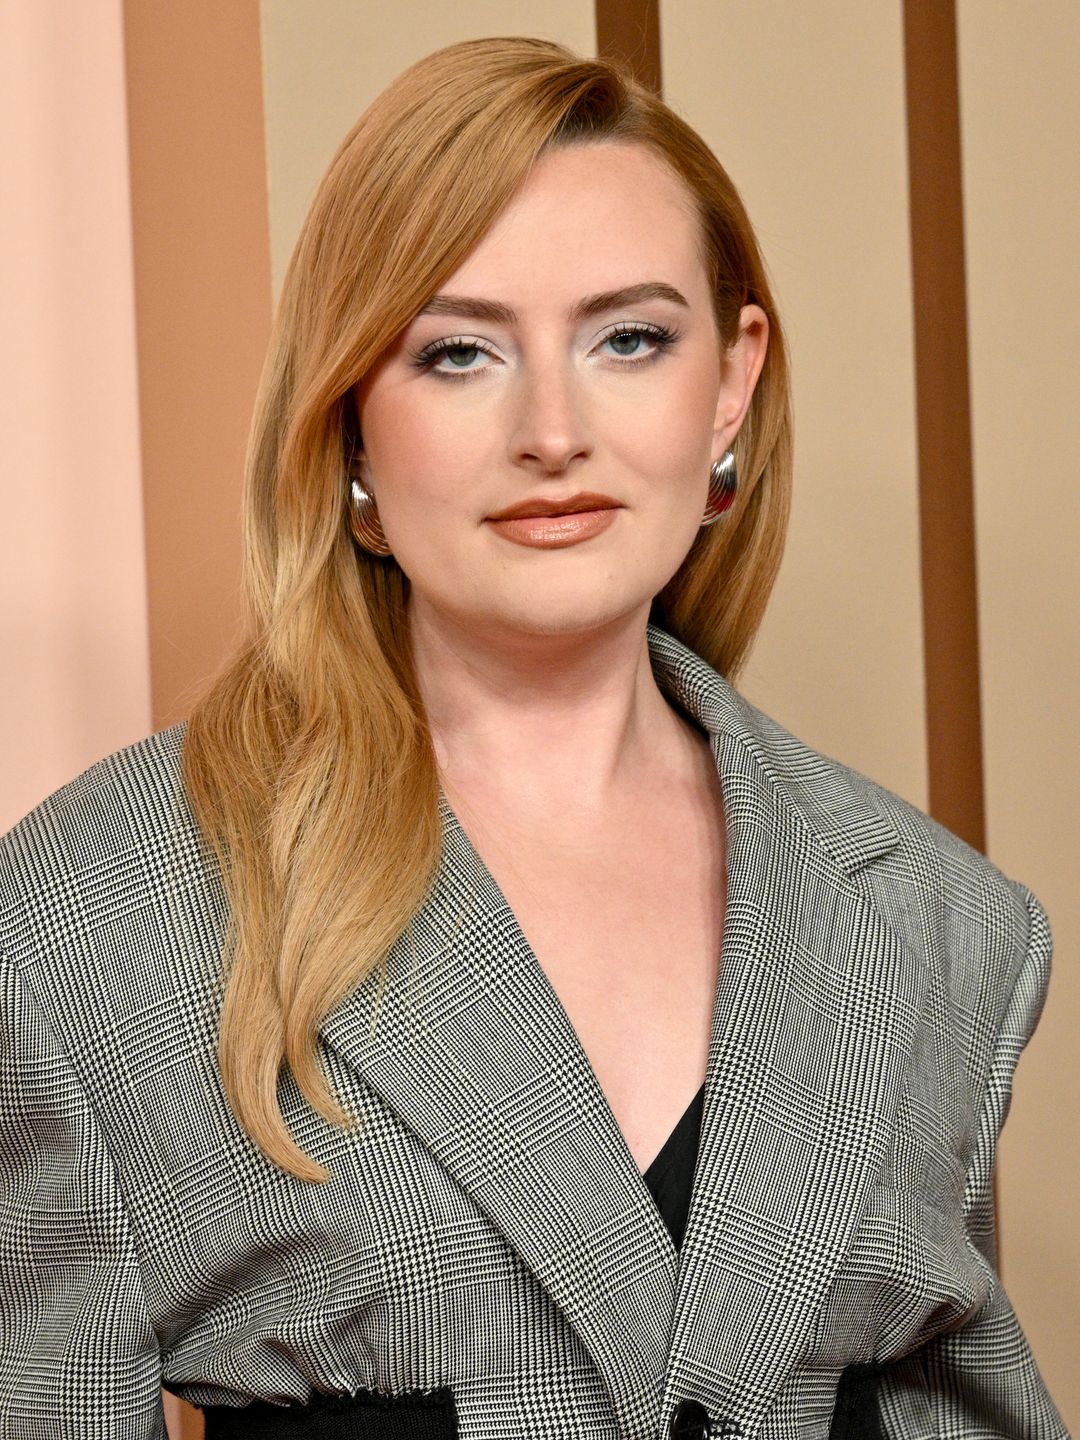 Amelia Dimoldenberg in a grey suit at the Oscars Luncheon